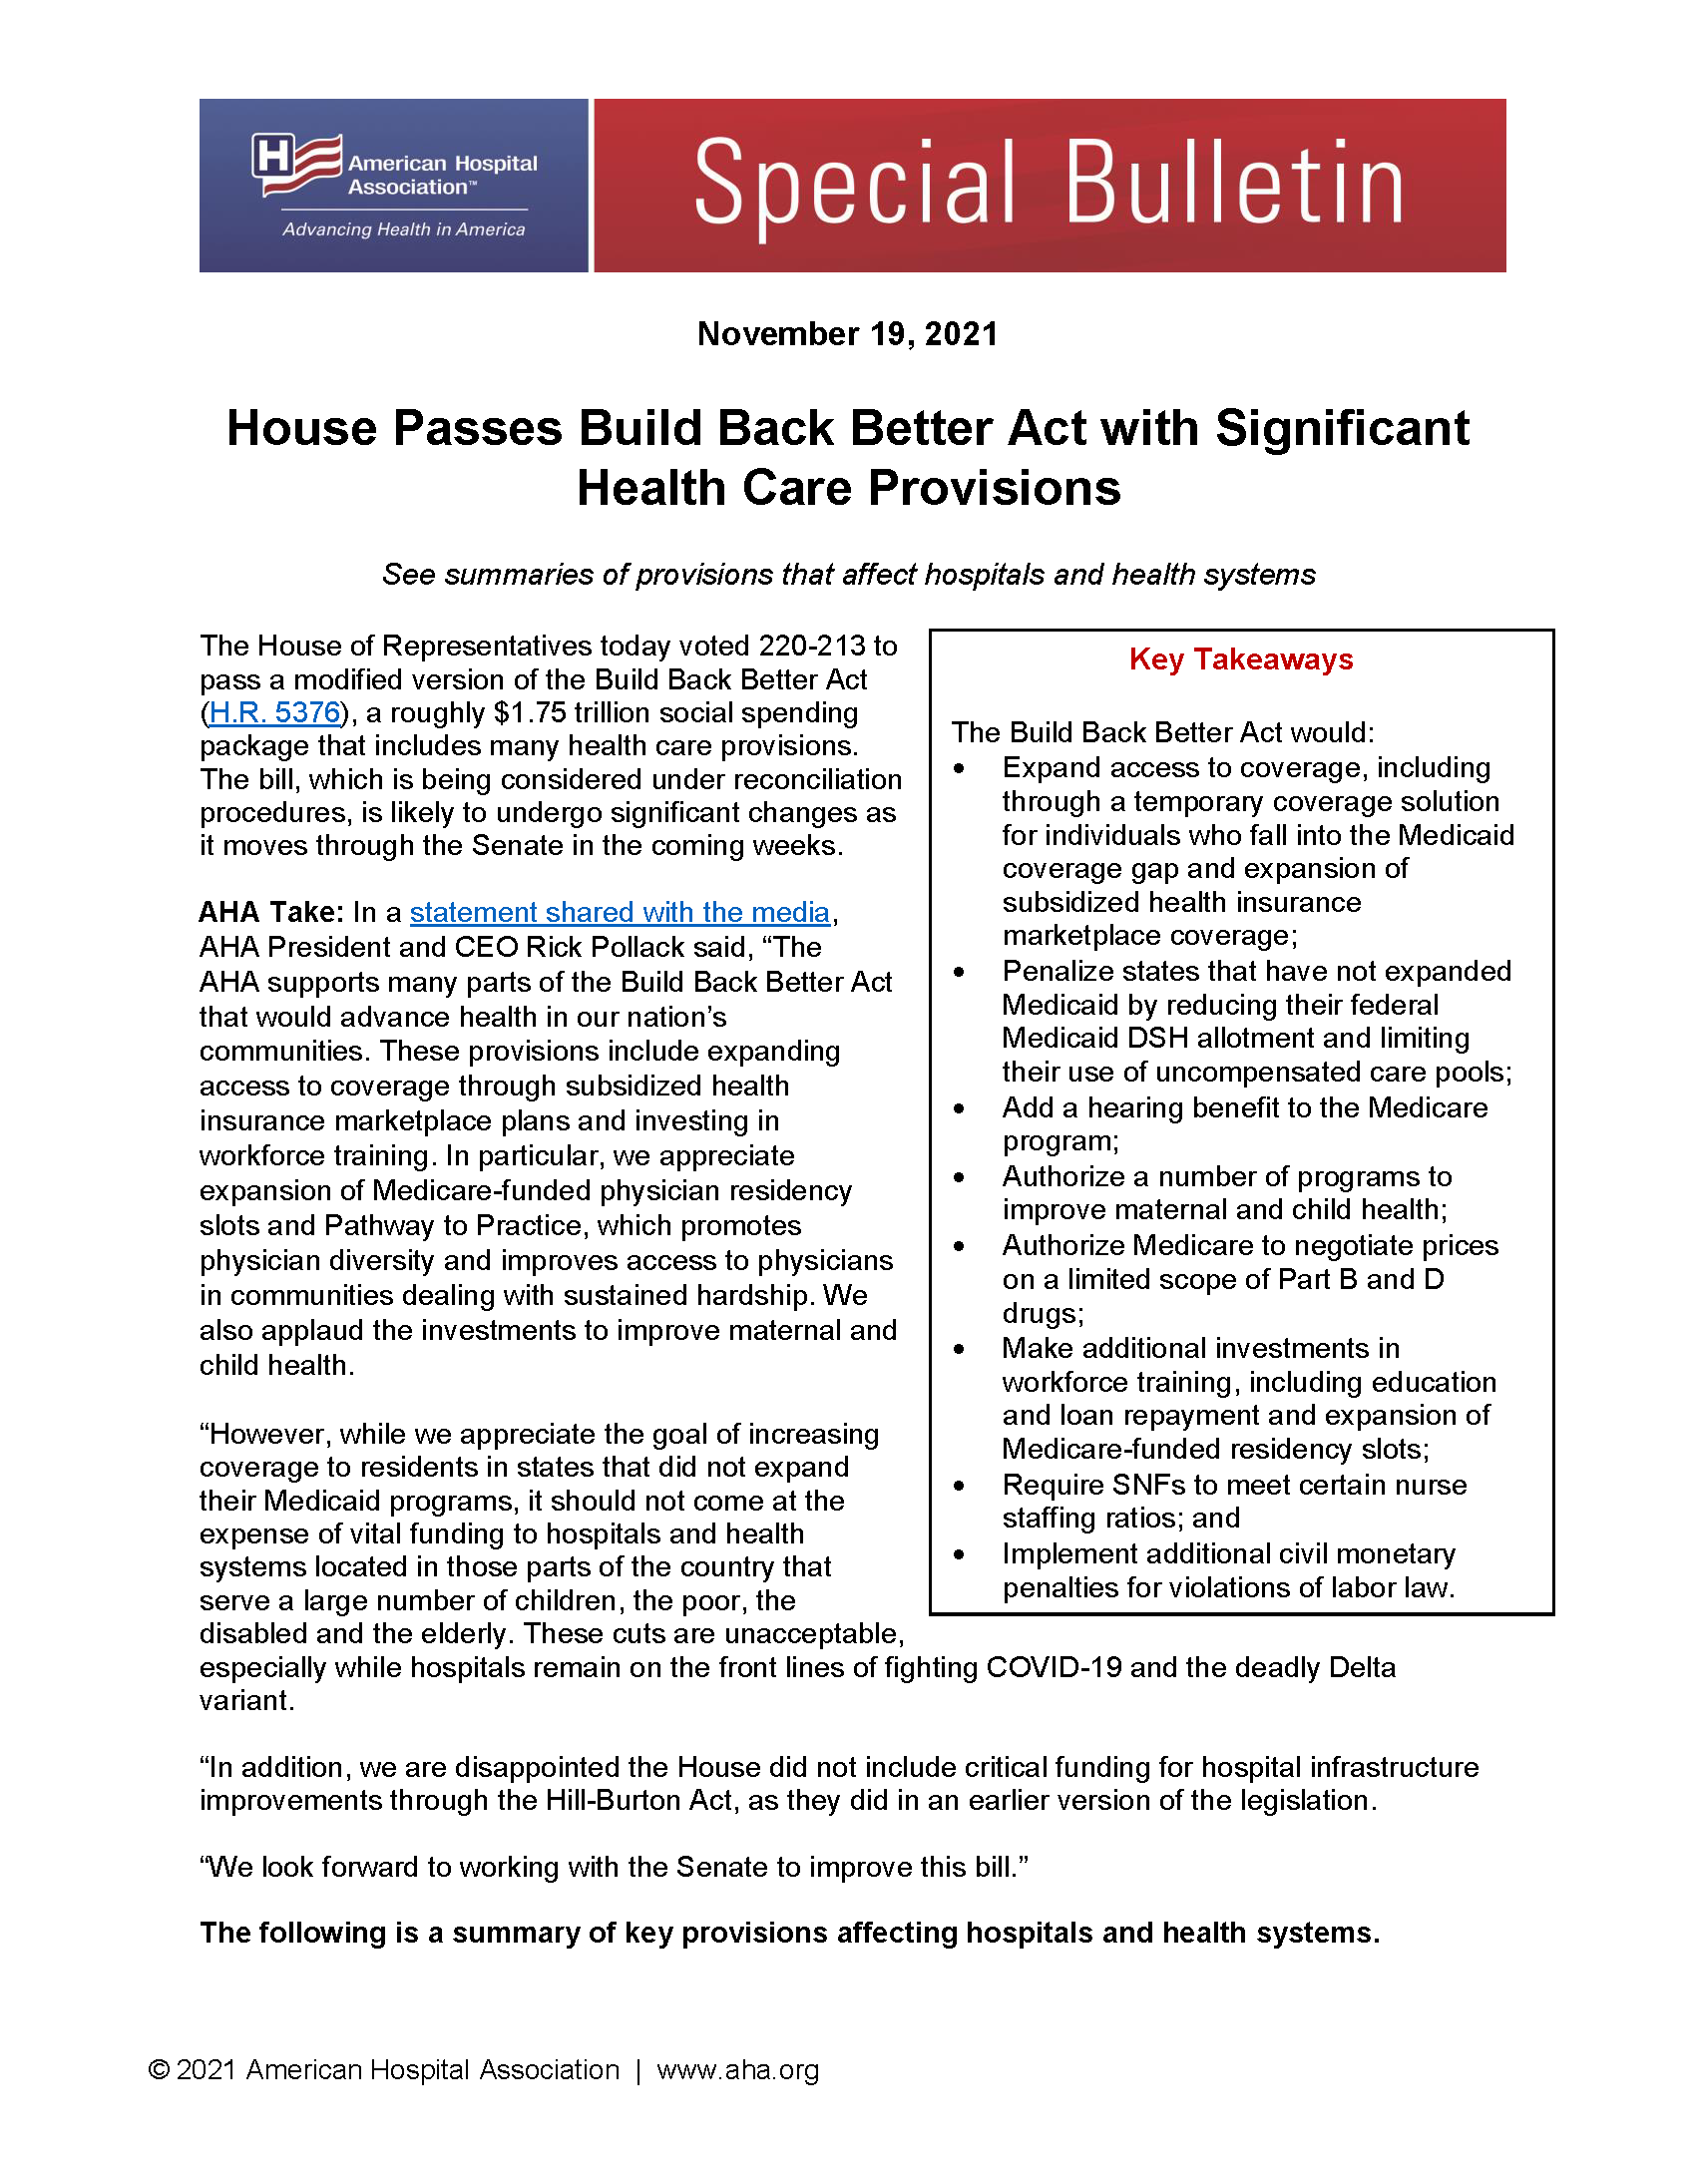  Special Bulletin: House Passes Build Back Better Act with Significant Health Care Provisions PDF page 1.